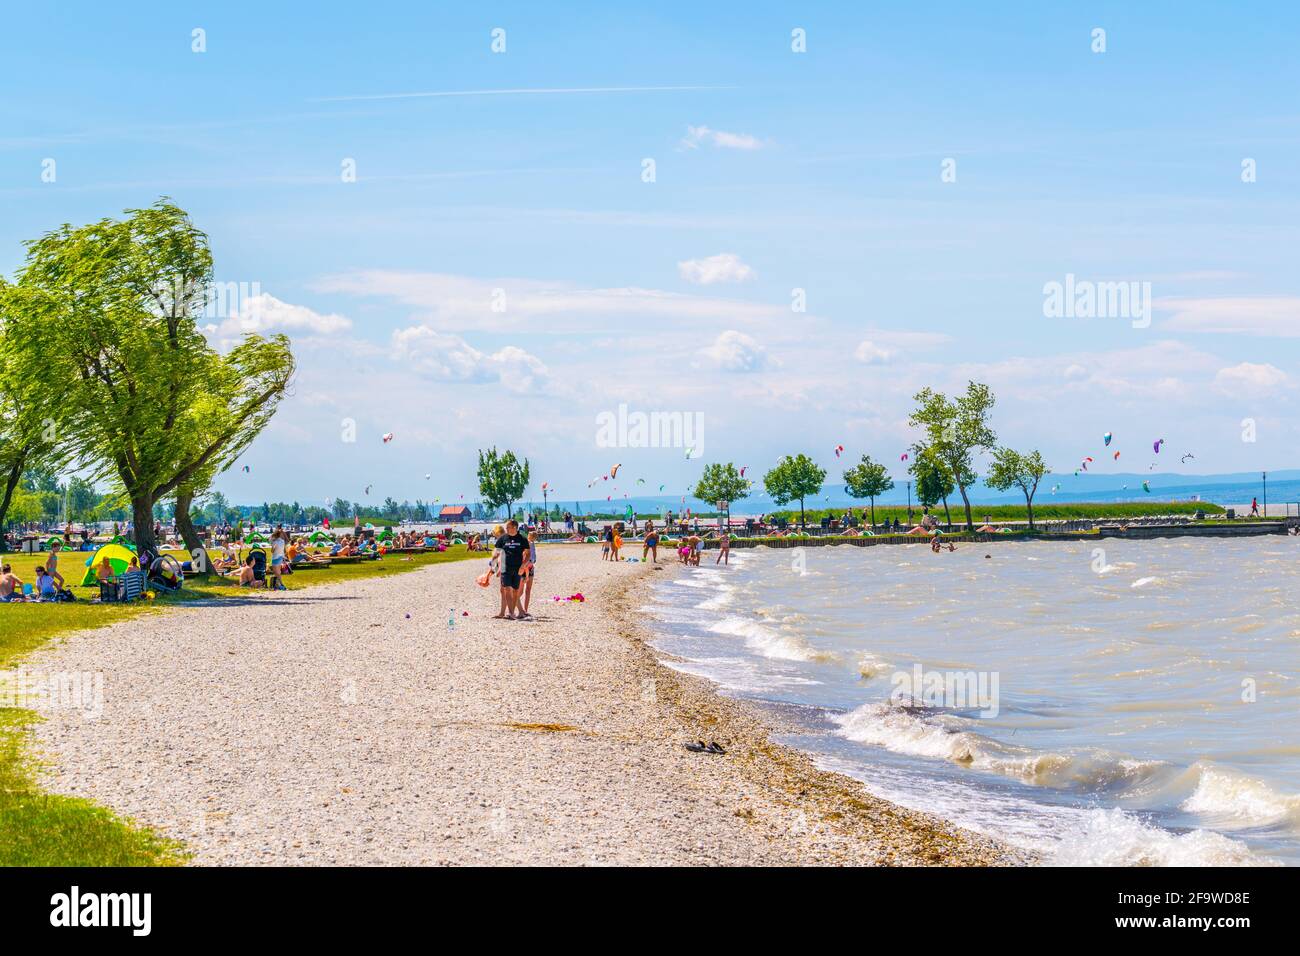 PODERSDORF, AUSTRIA, JULY 9, 2016: People are enjoying day on a beach in Podersdorf am See in Austria. Stock Photo